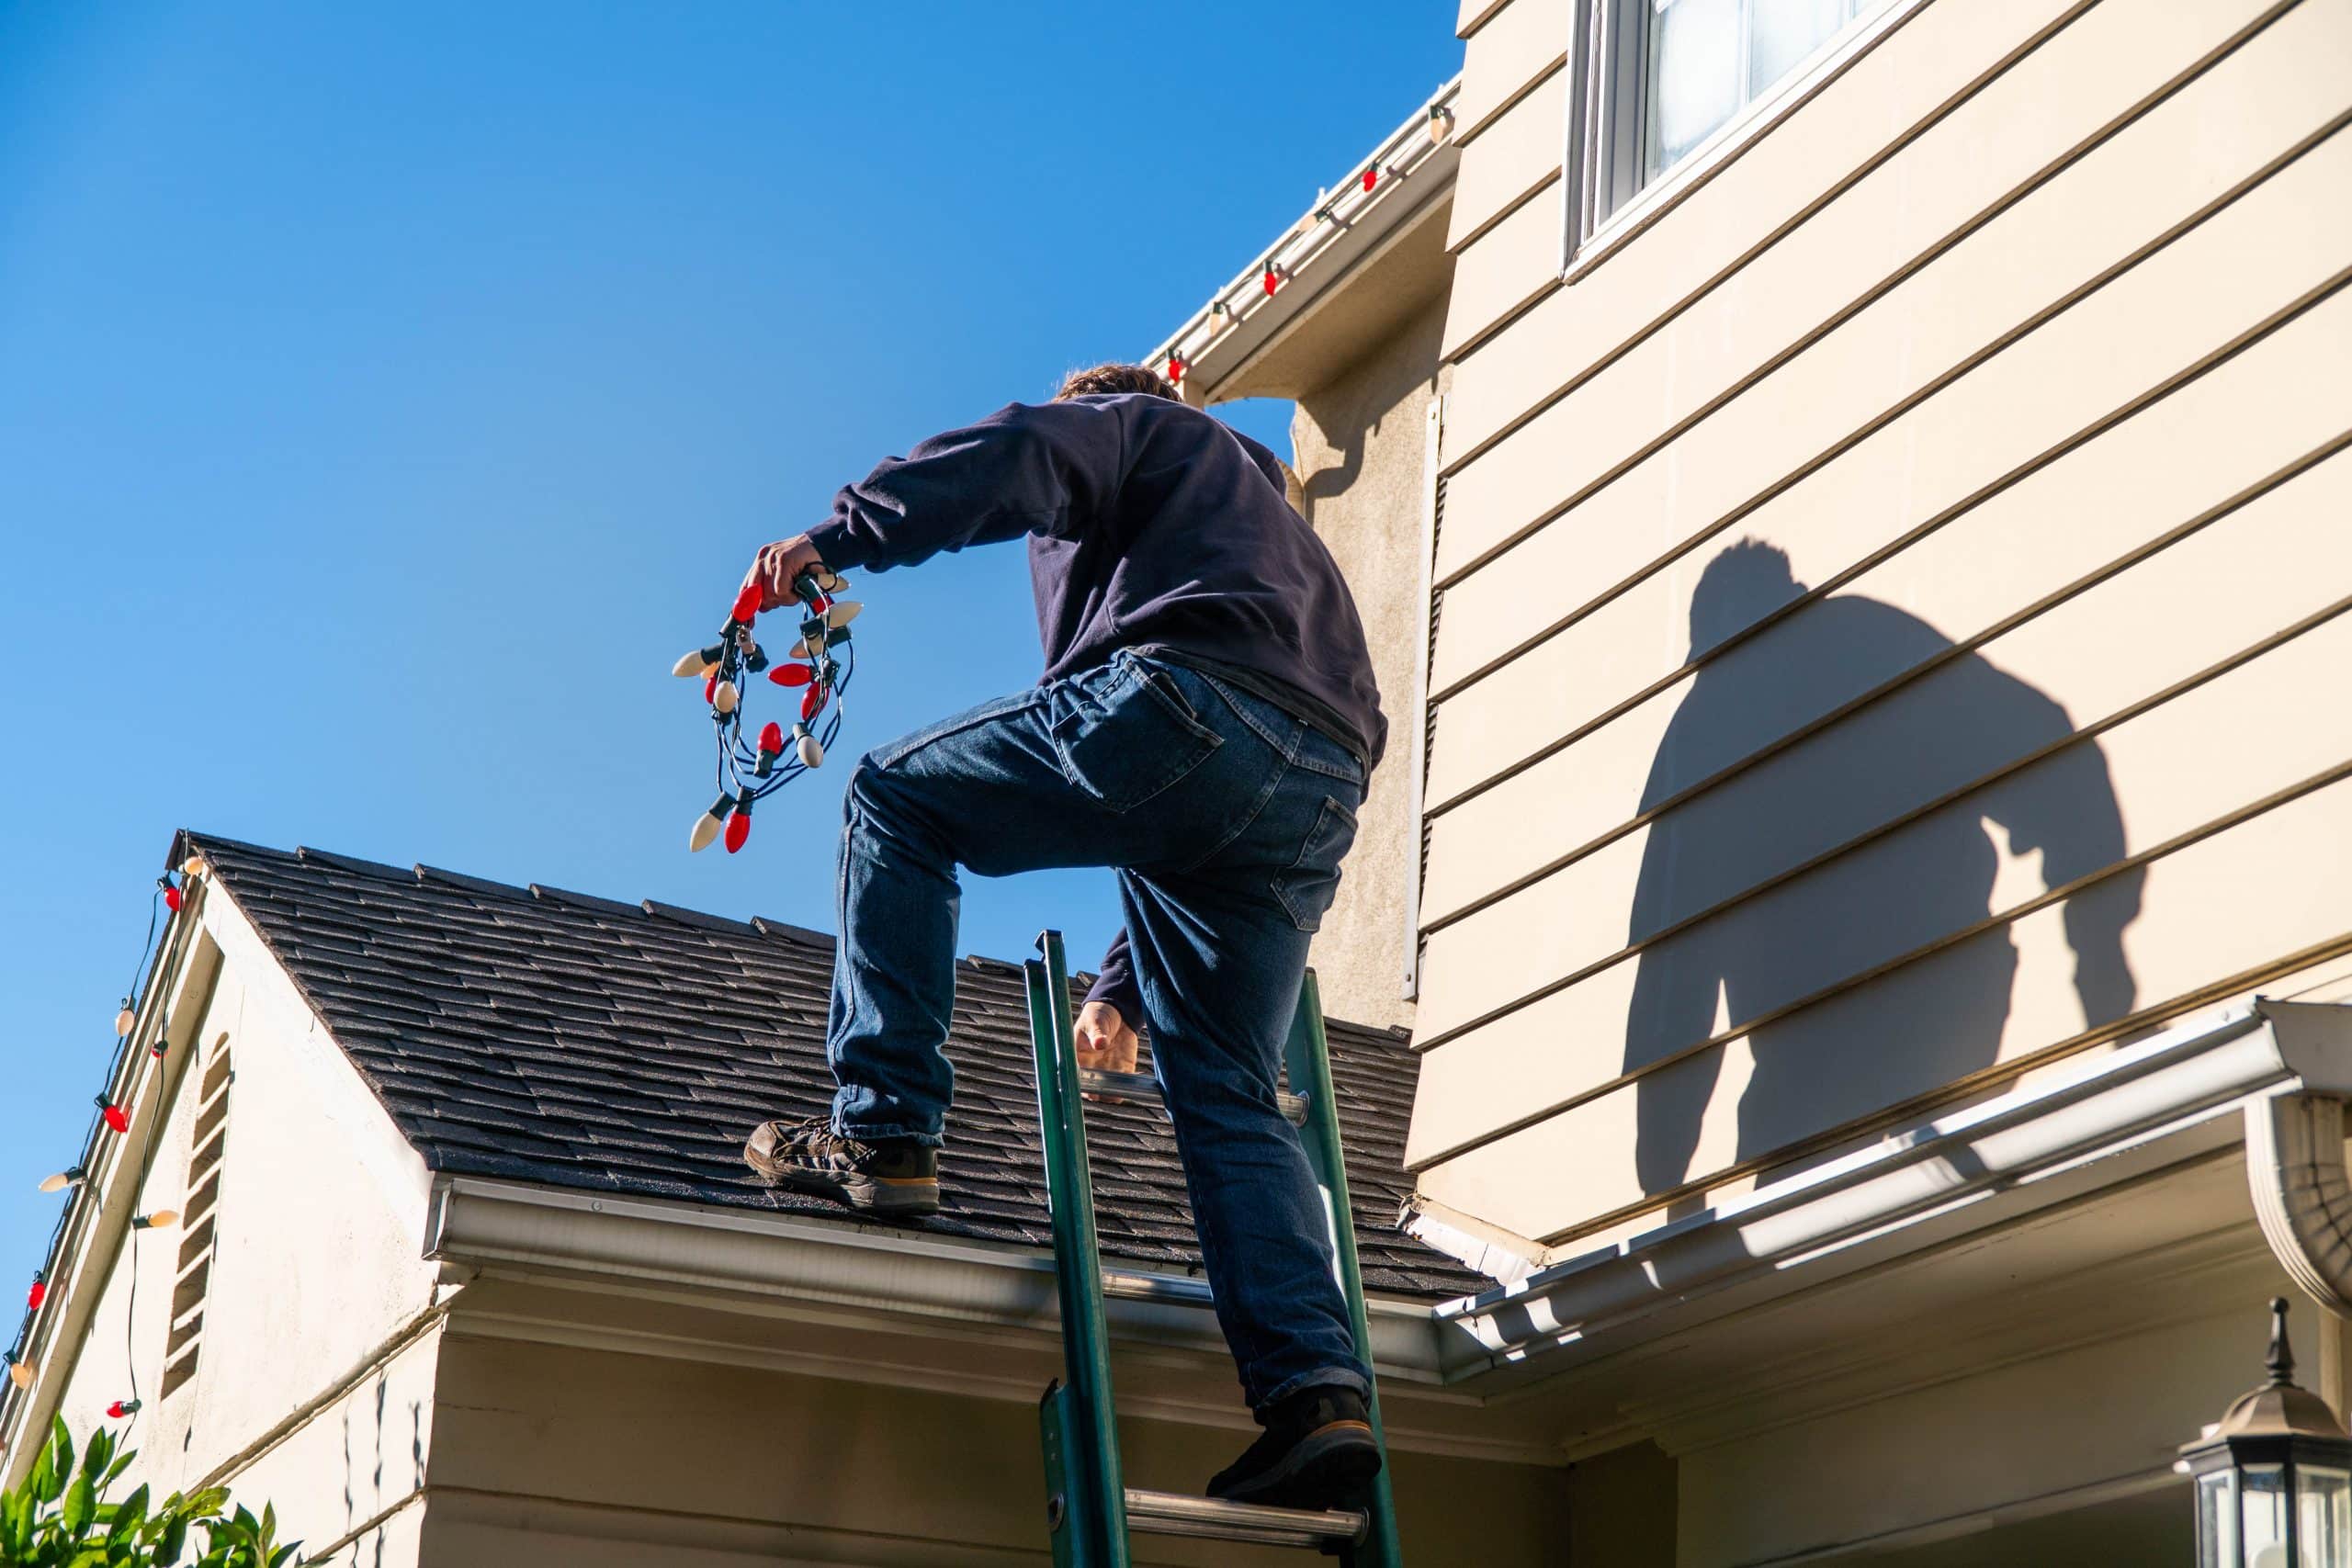 Man climbing ladder onto roof holding exterior colorful lights